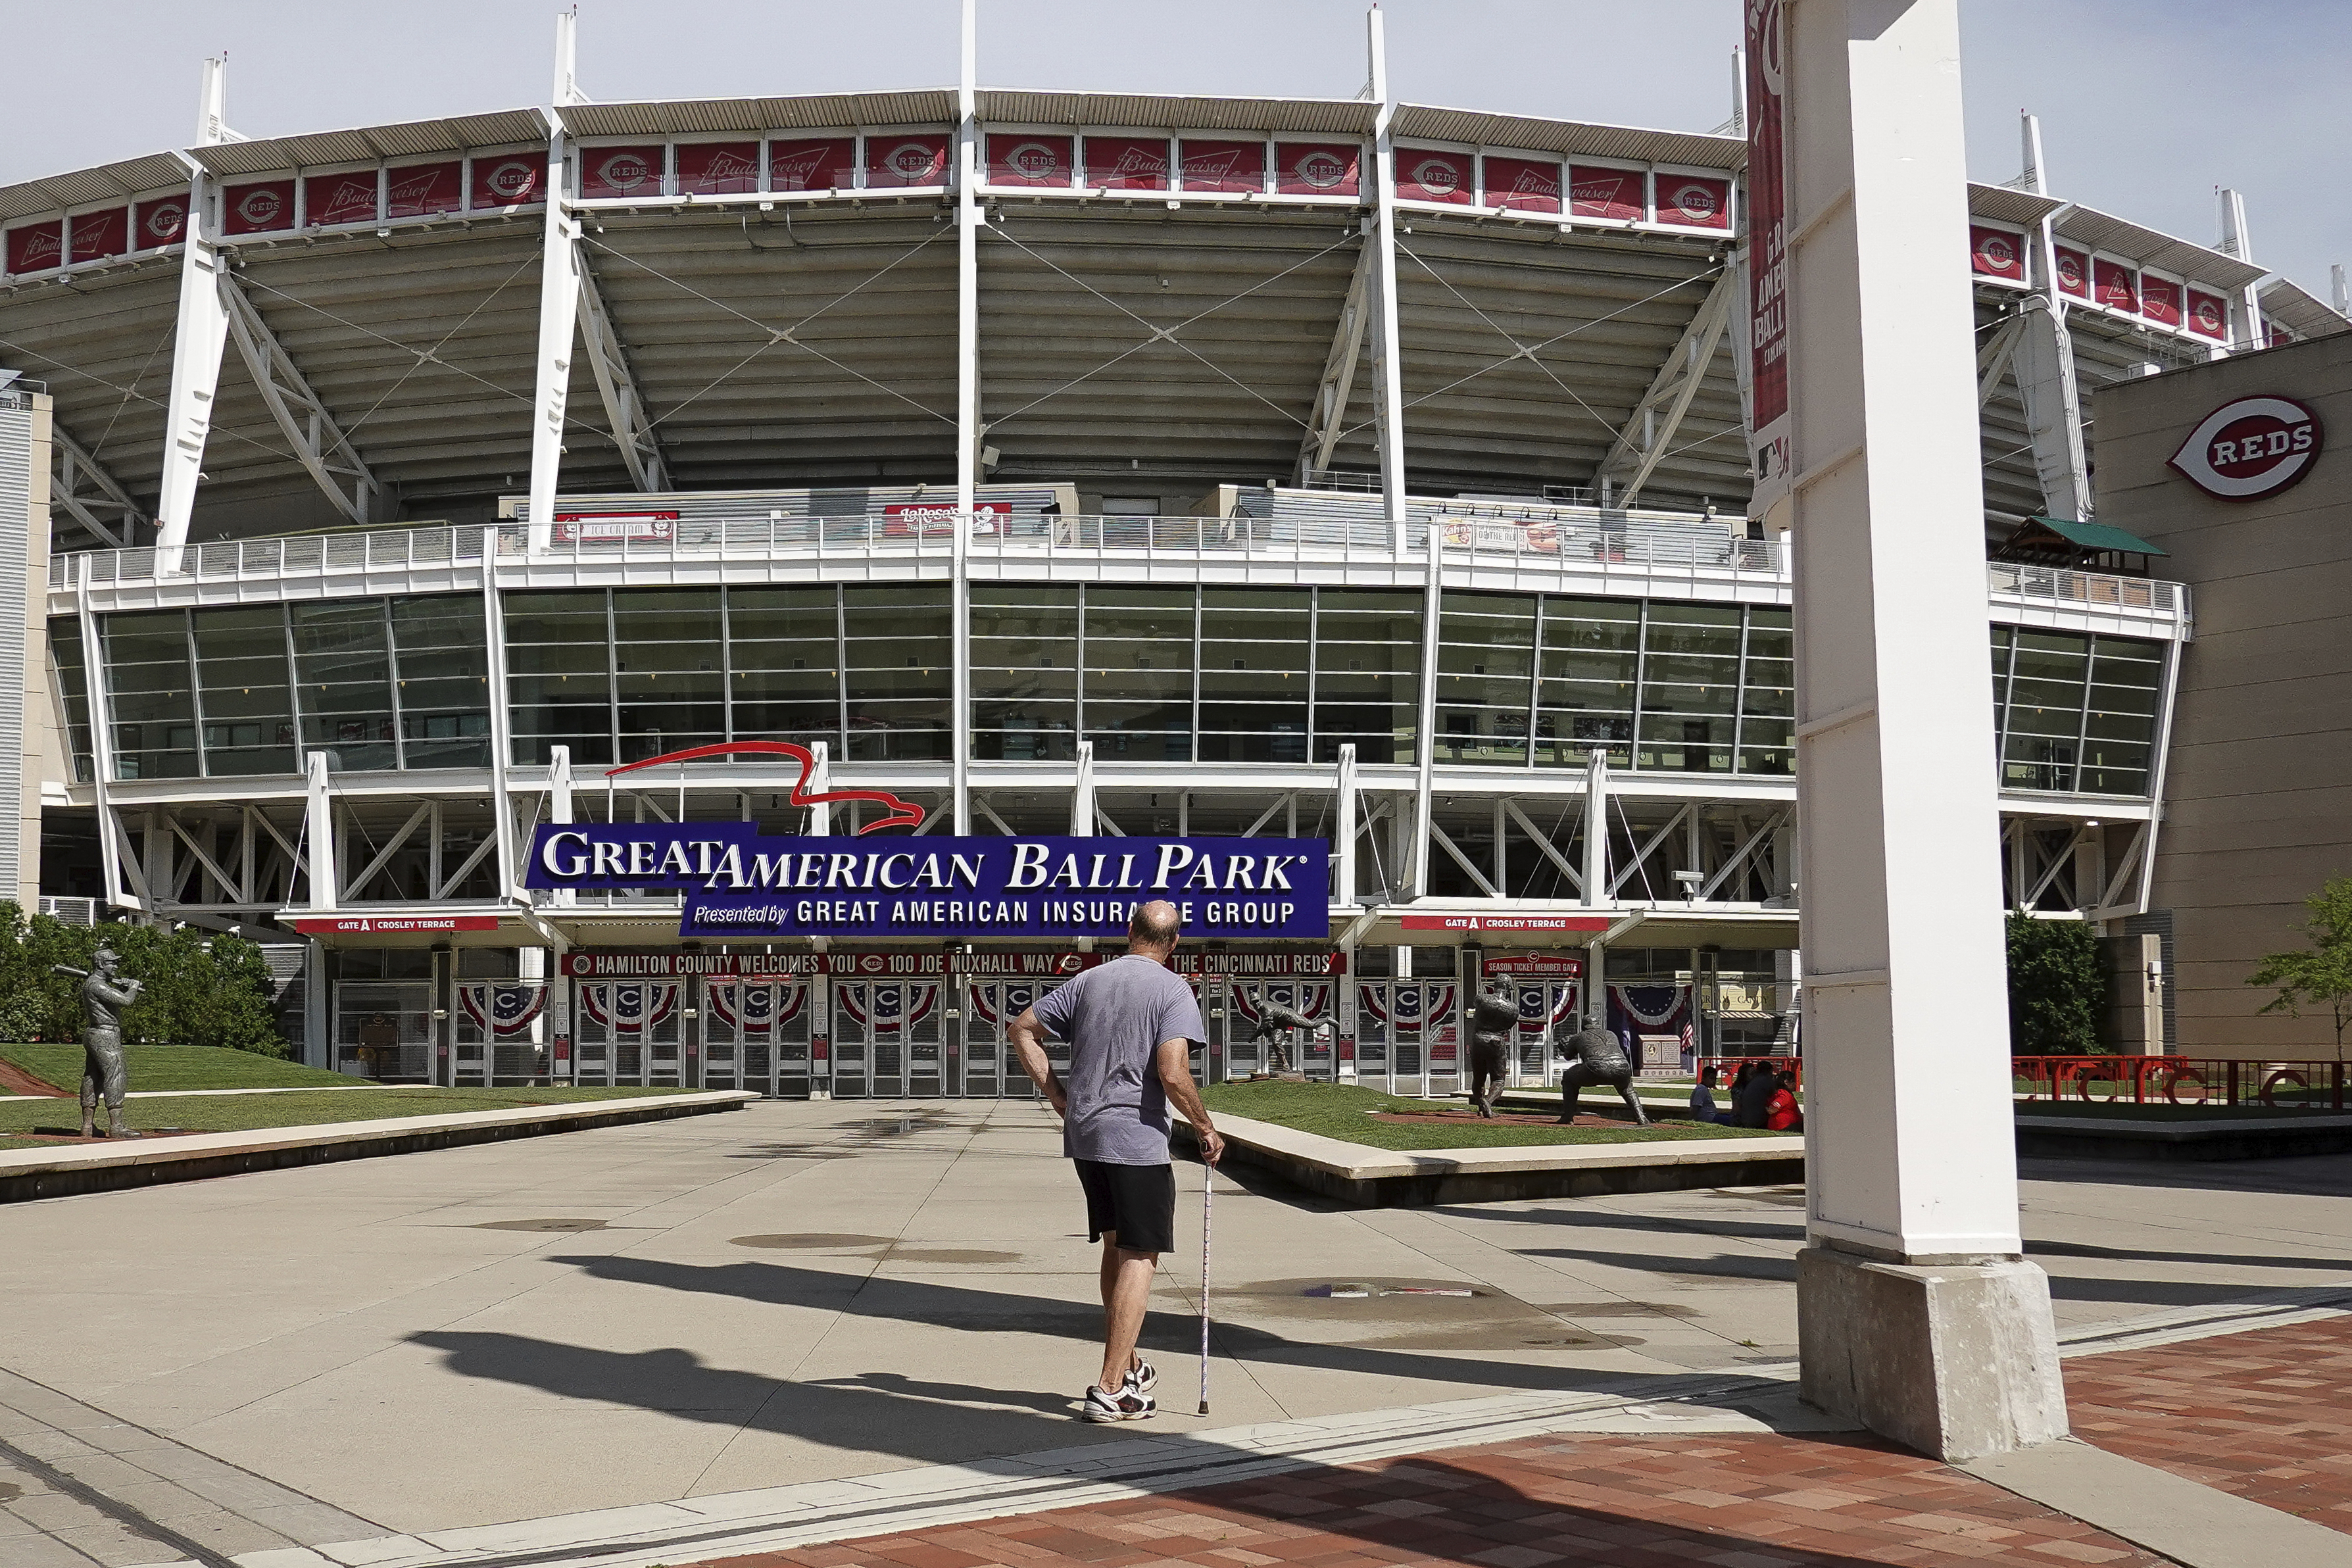 Reds hold out hope fans will be able to attend games in 2020